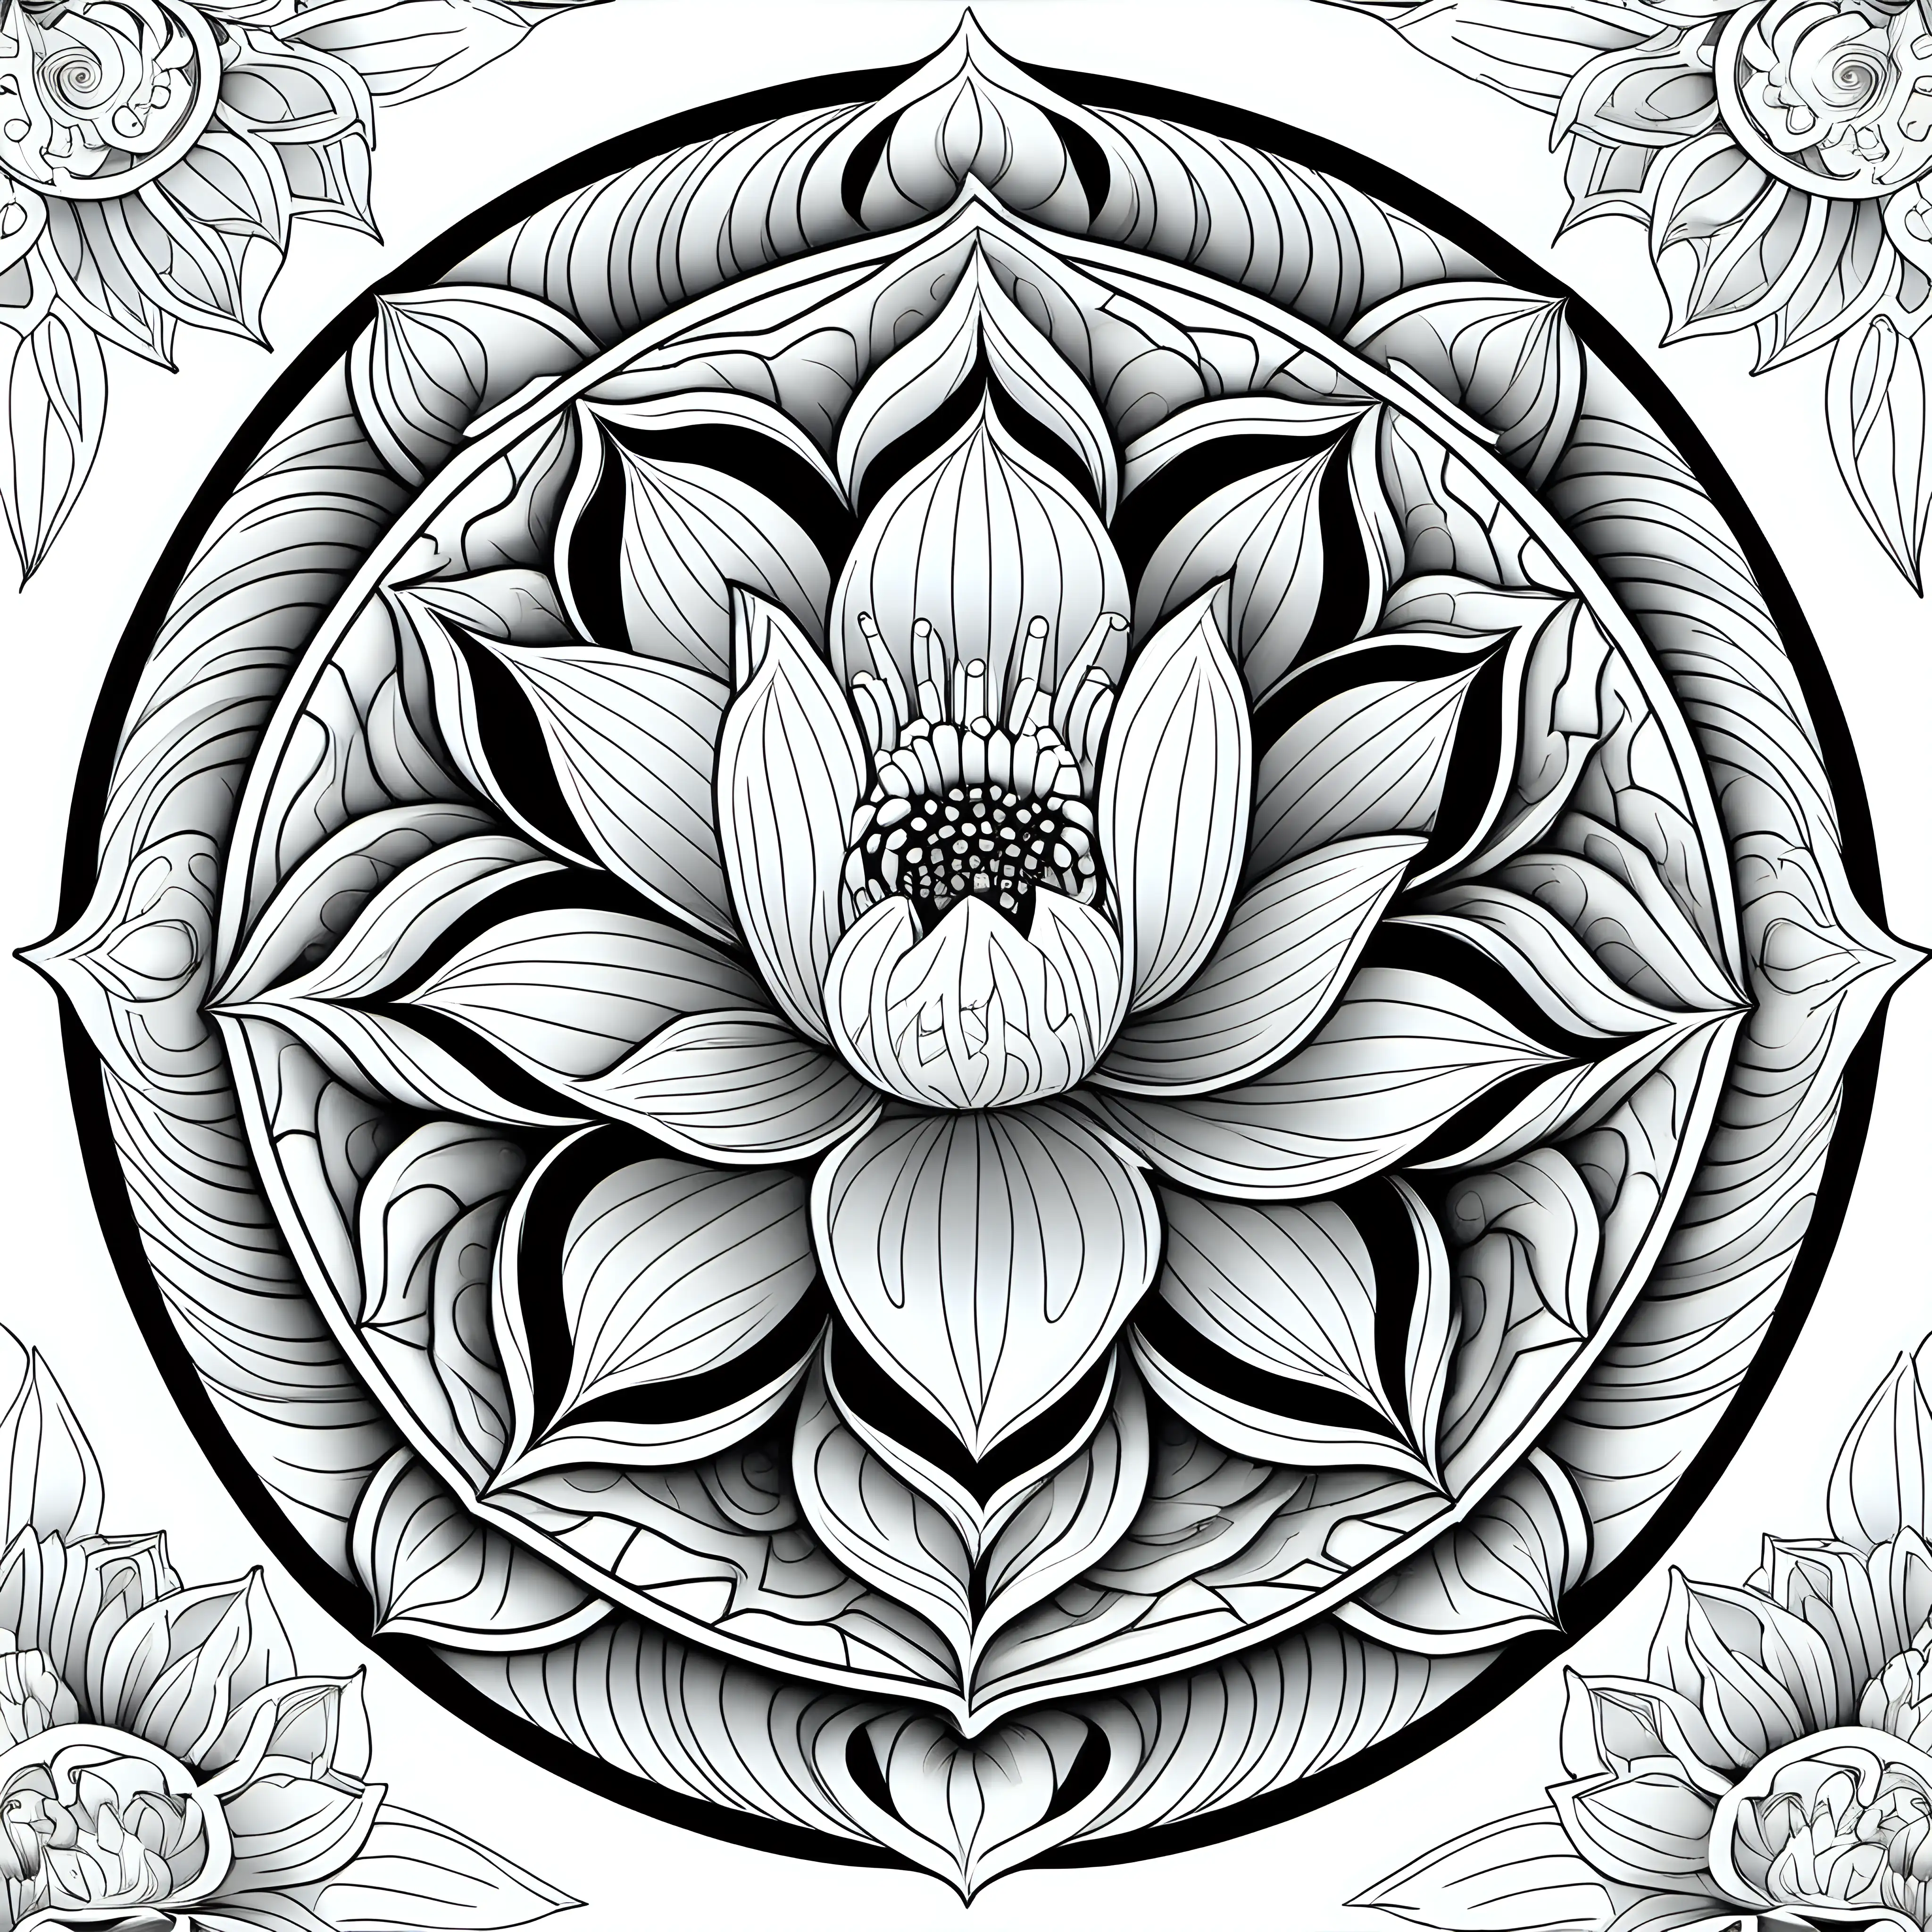 Intricate Mandala Lotus Flower Coloring Page with Celestial Moon and Stars